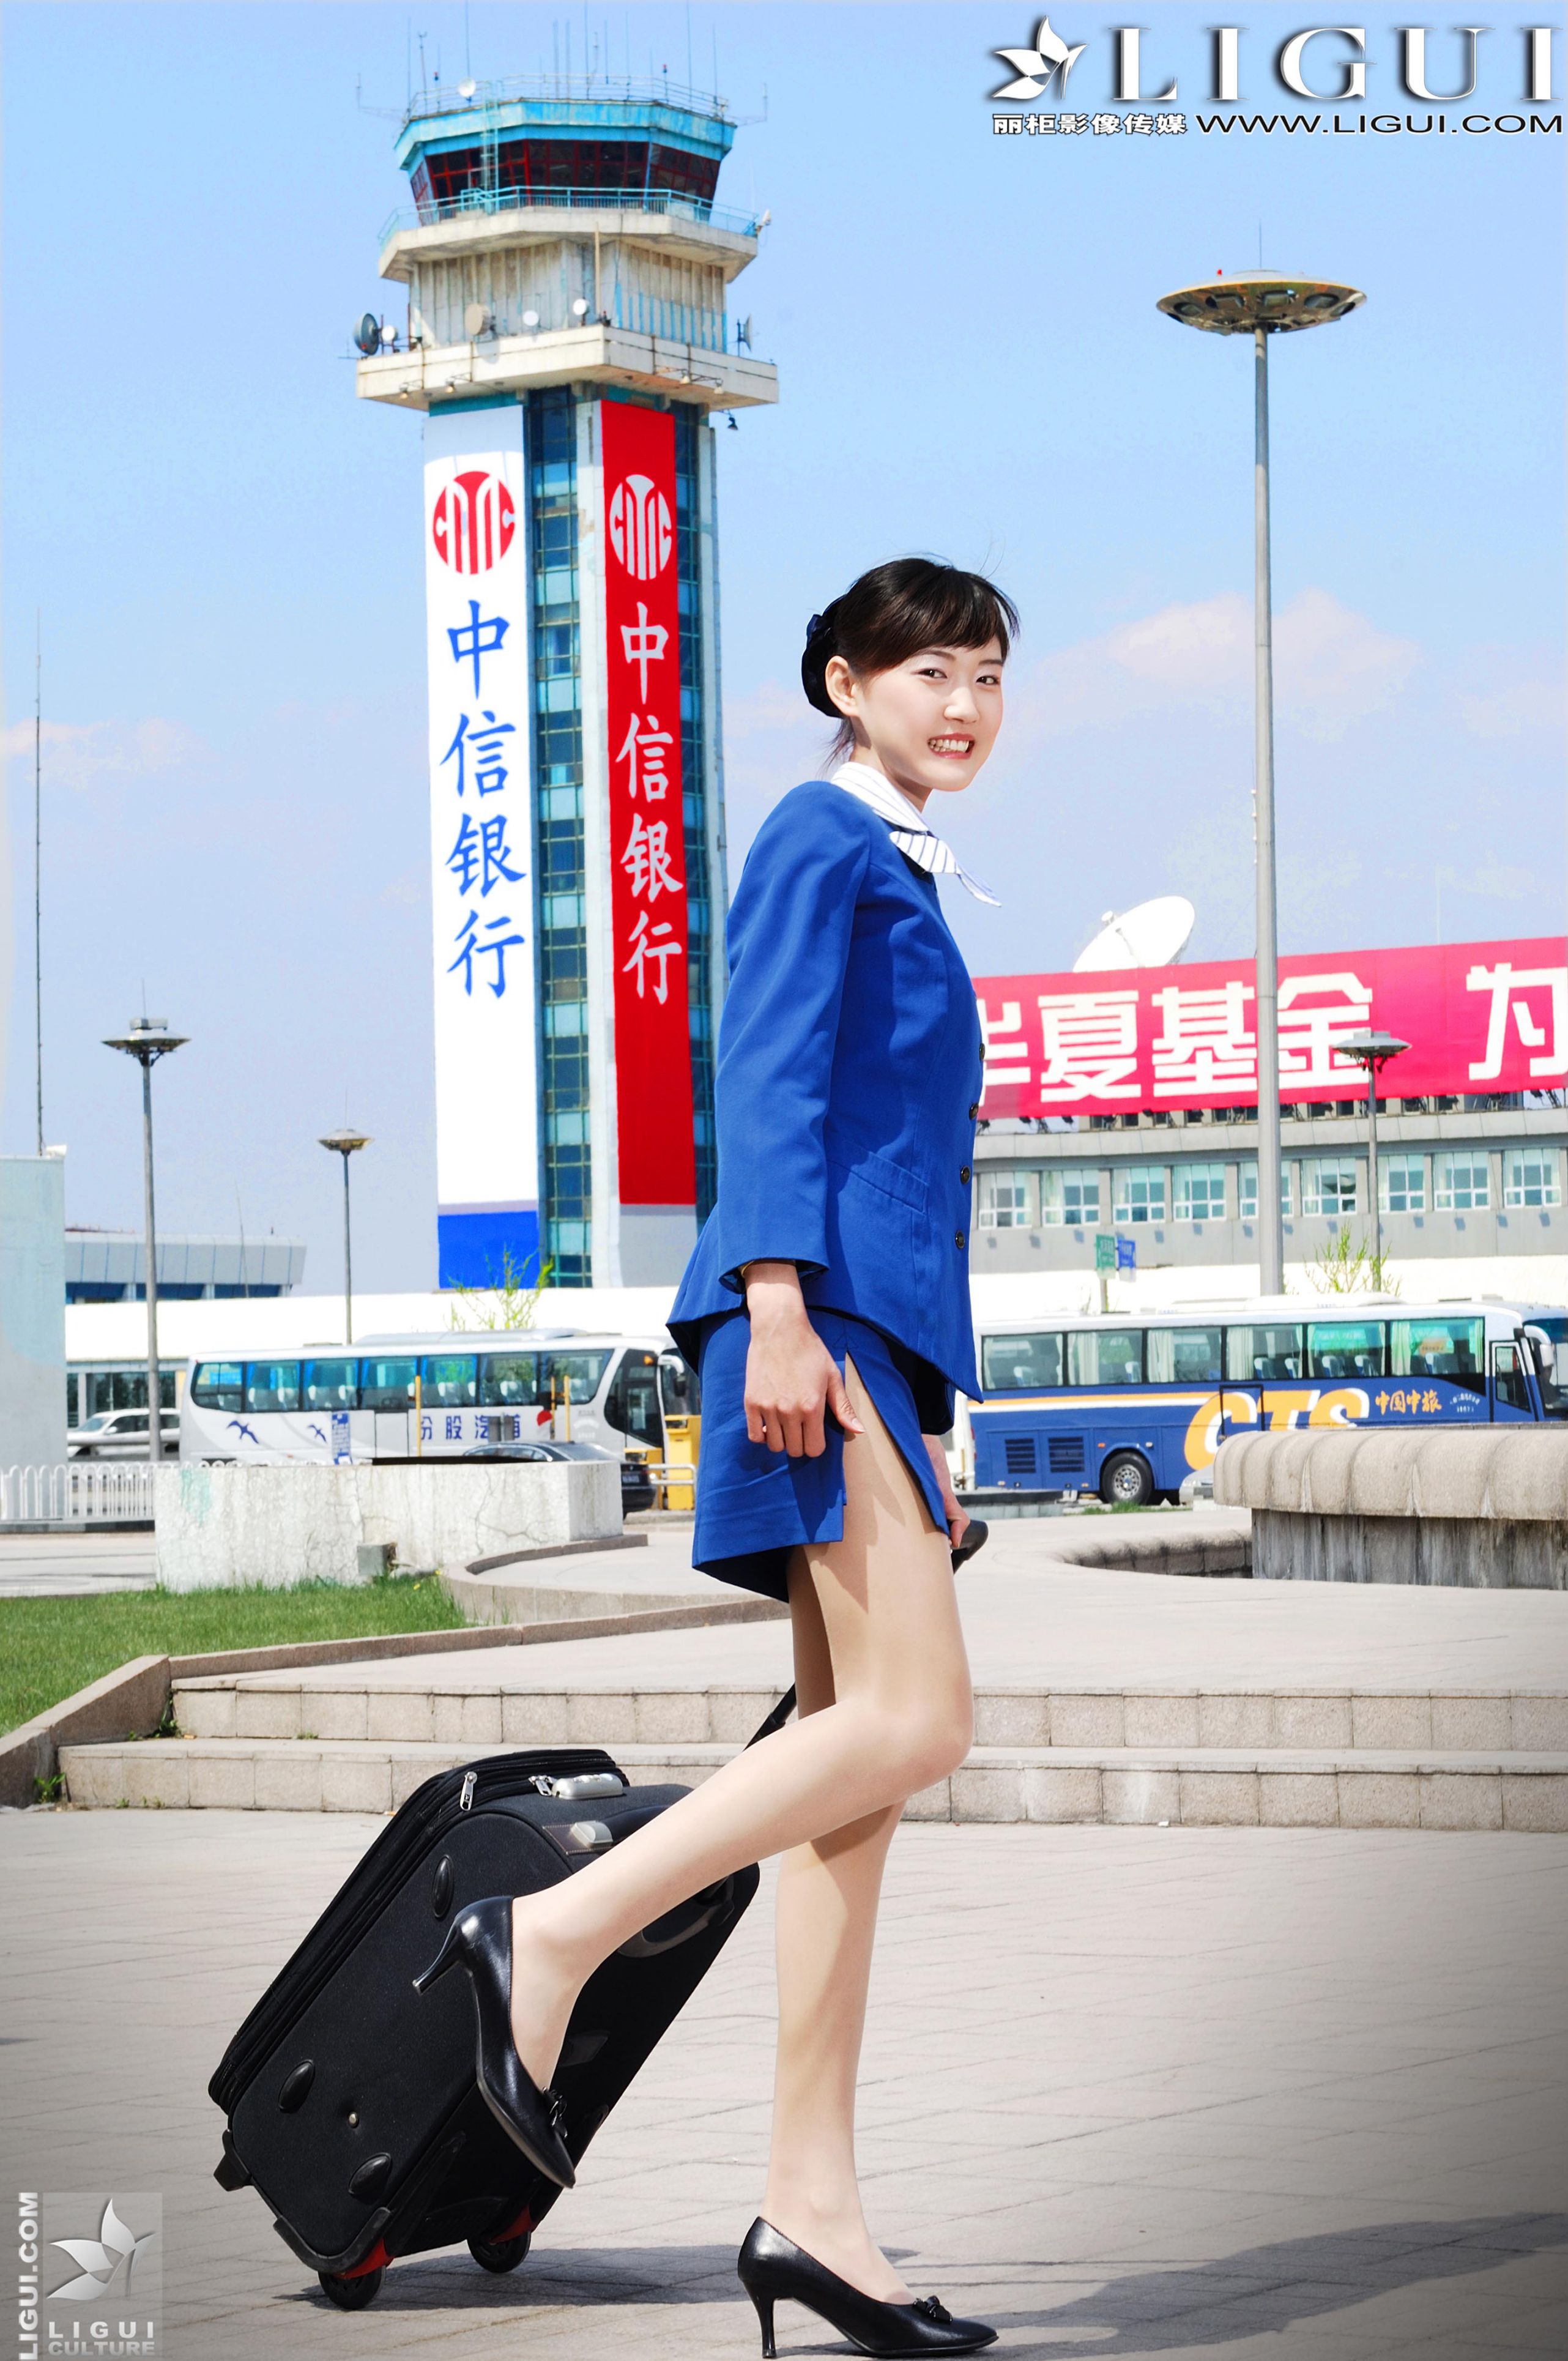 Model Tingting "Stewardess Series" [丽柜LiGui] Beautiful legs and silk feet photo pictures Page 11 No.f419a7